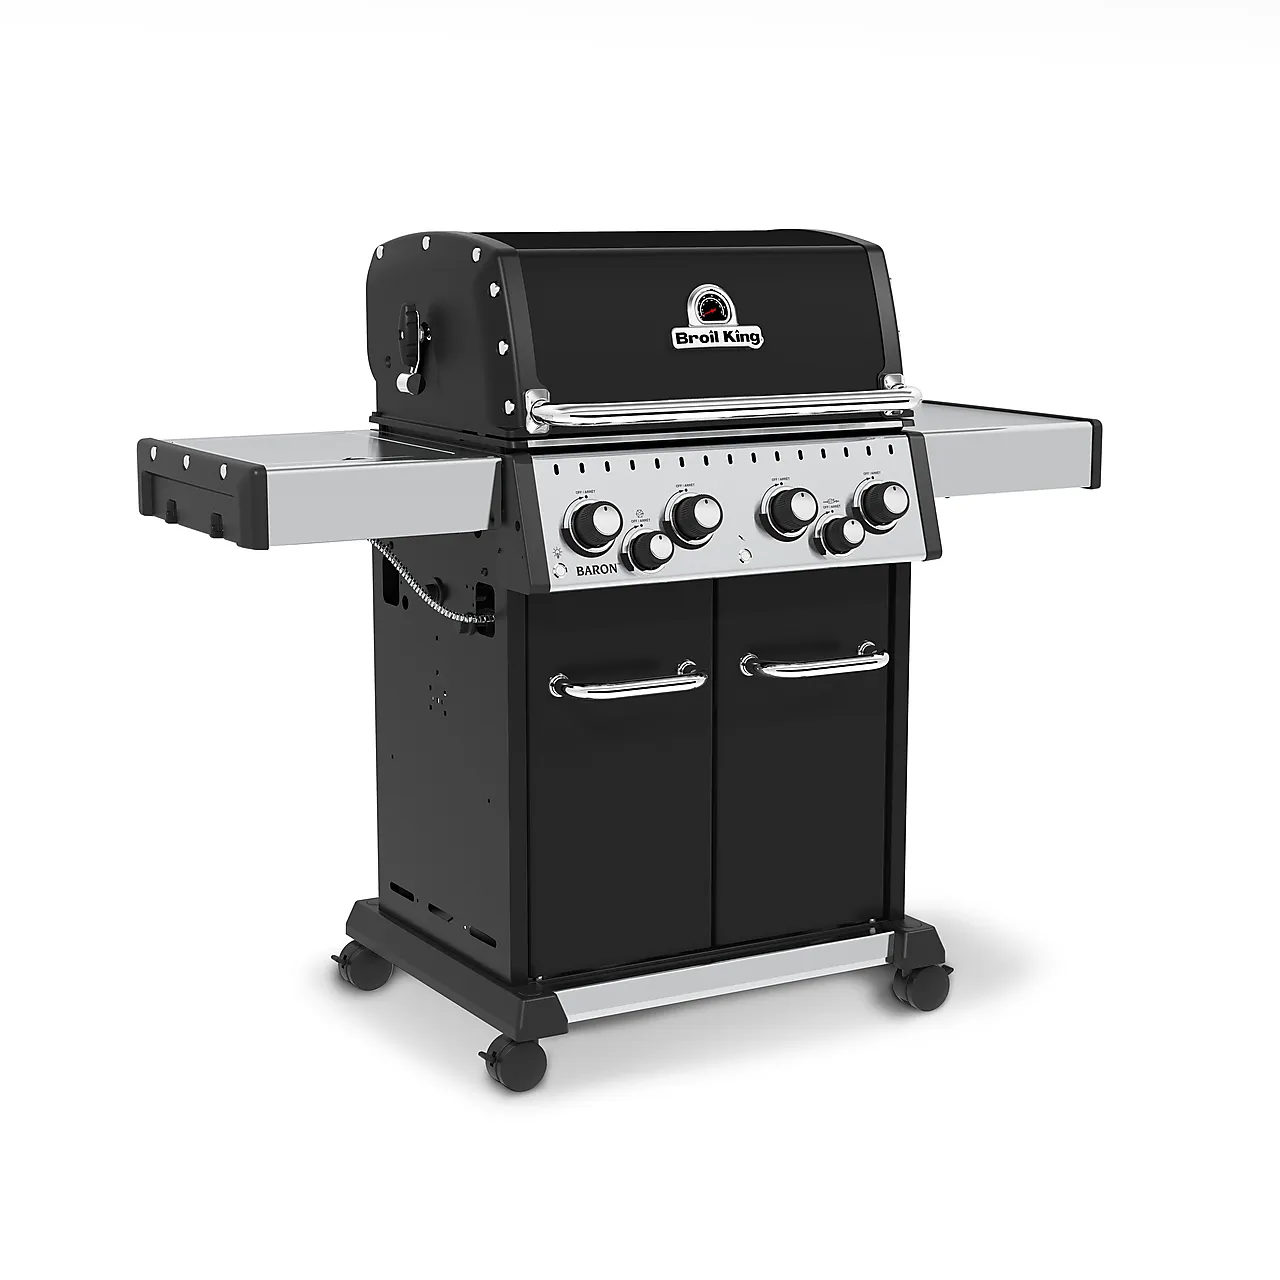 Gassgrill baron 590 null - null - 9